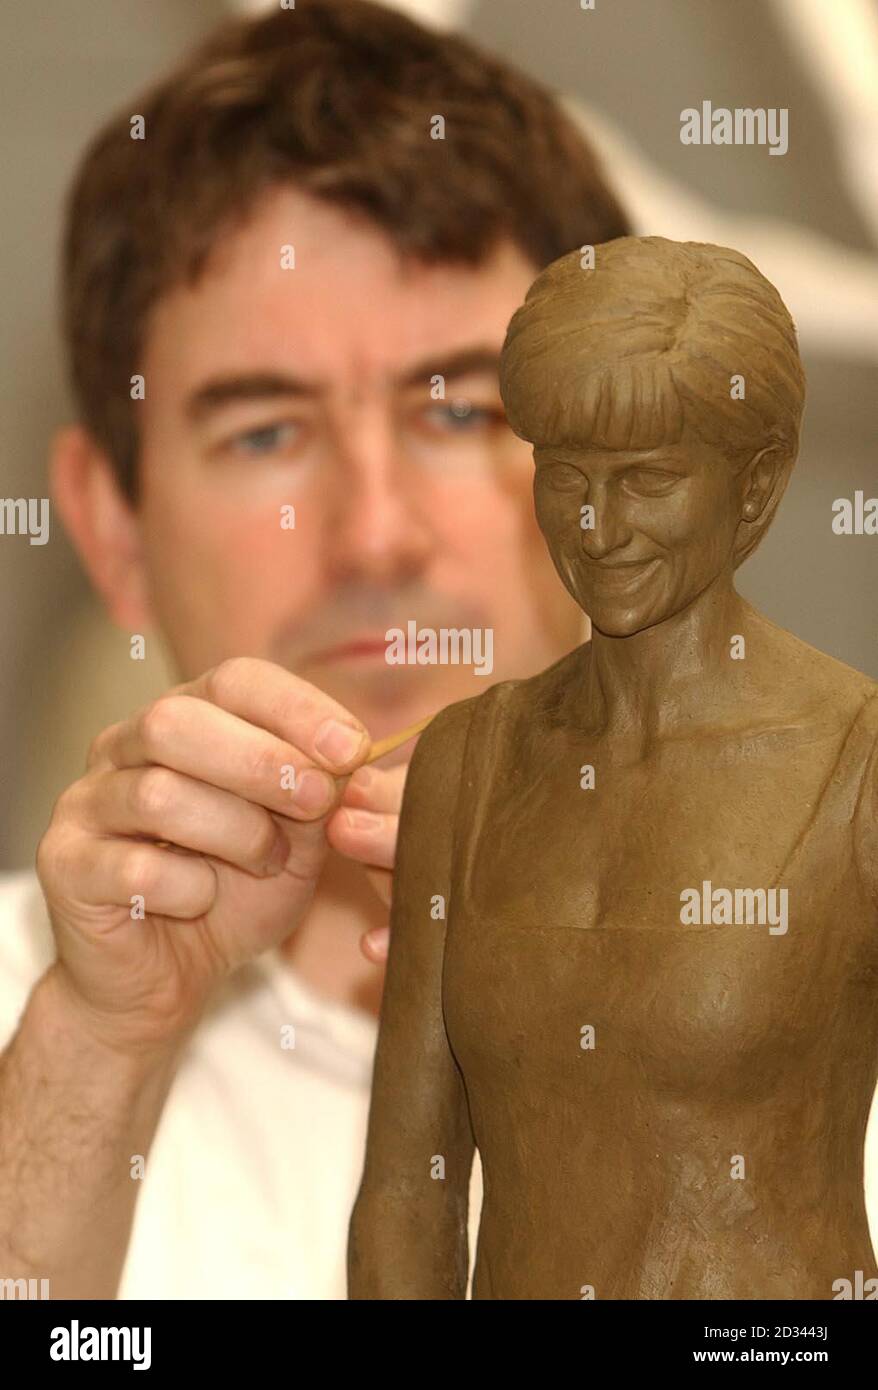 The latest artistic tribute to Diana, Princess of Wales was revealed today - and proved a stark contrast to the beleaguered memorial fountain. The statue shows the princess in a simple floor-length evening gown - devoid of jewellery - and wearing a broad smile Nigel Boonham puts the finishing touches to a 30cm high clay model of the late Princess Diana of Wales, which will become a 3 meter high bronze statue, which will be installed on the South Bank near to the river Thames. Stock Photo